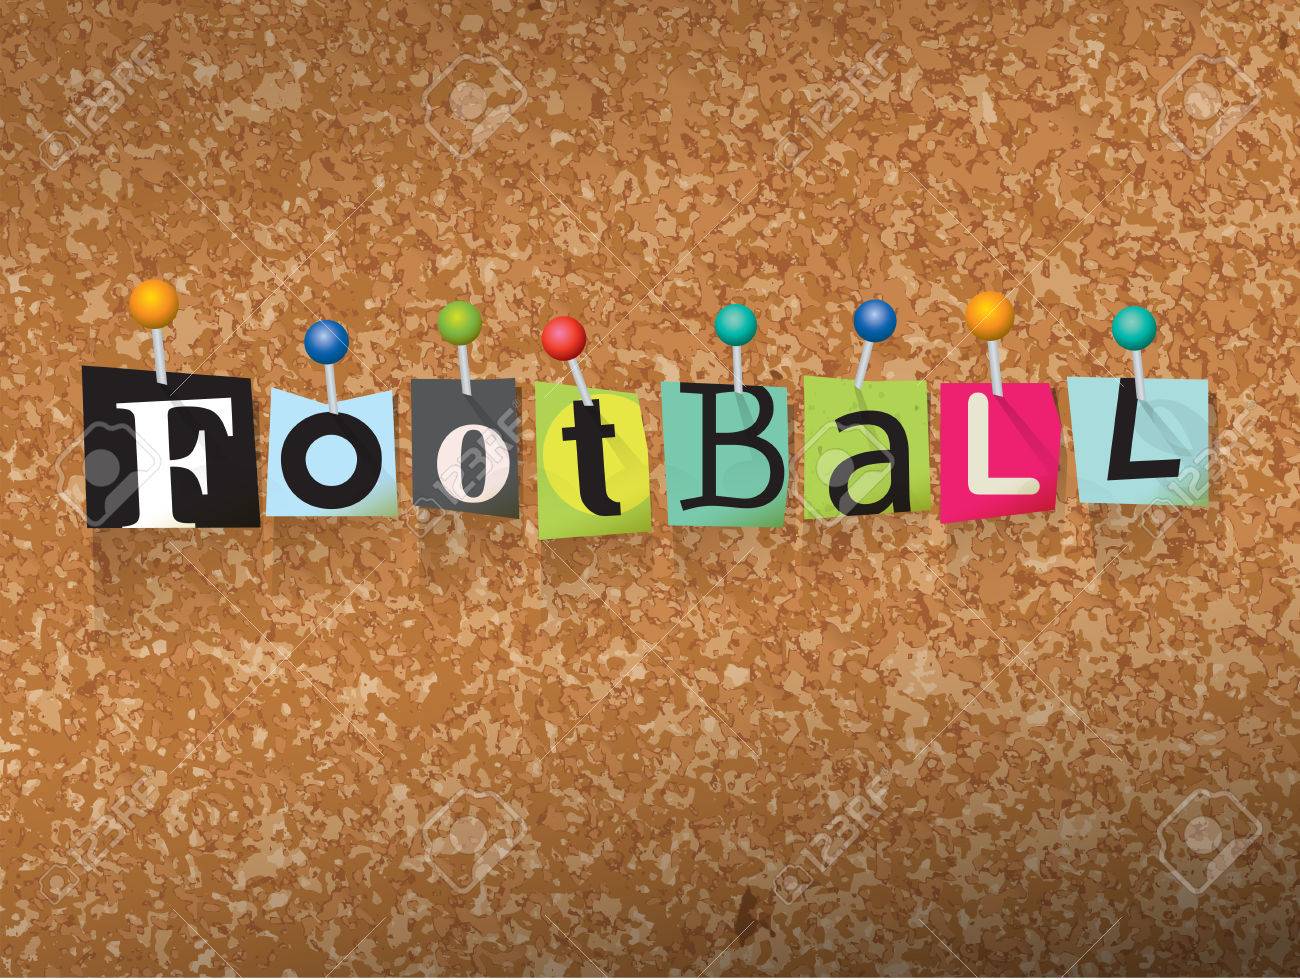 Football Concept Pinned Letters Illustration